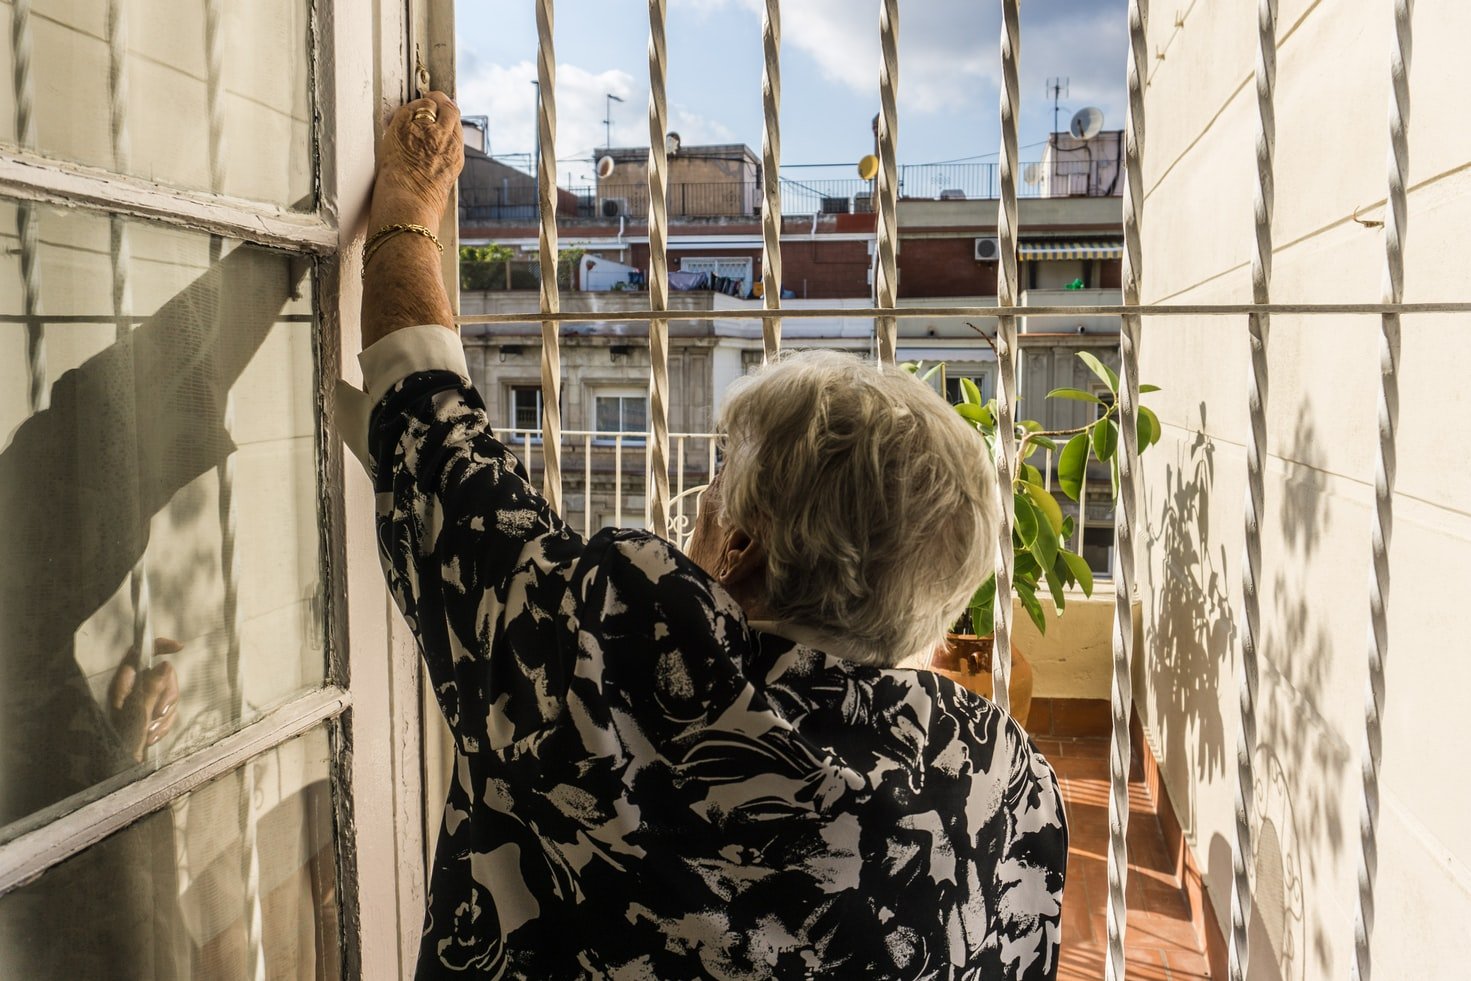 There is an old woman waiting for Tammy at the door |  Source: Unsplash